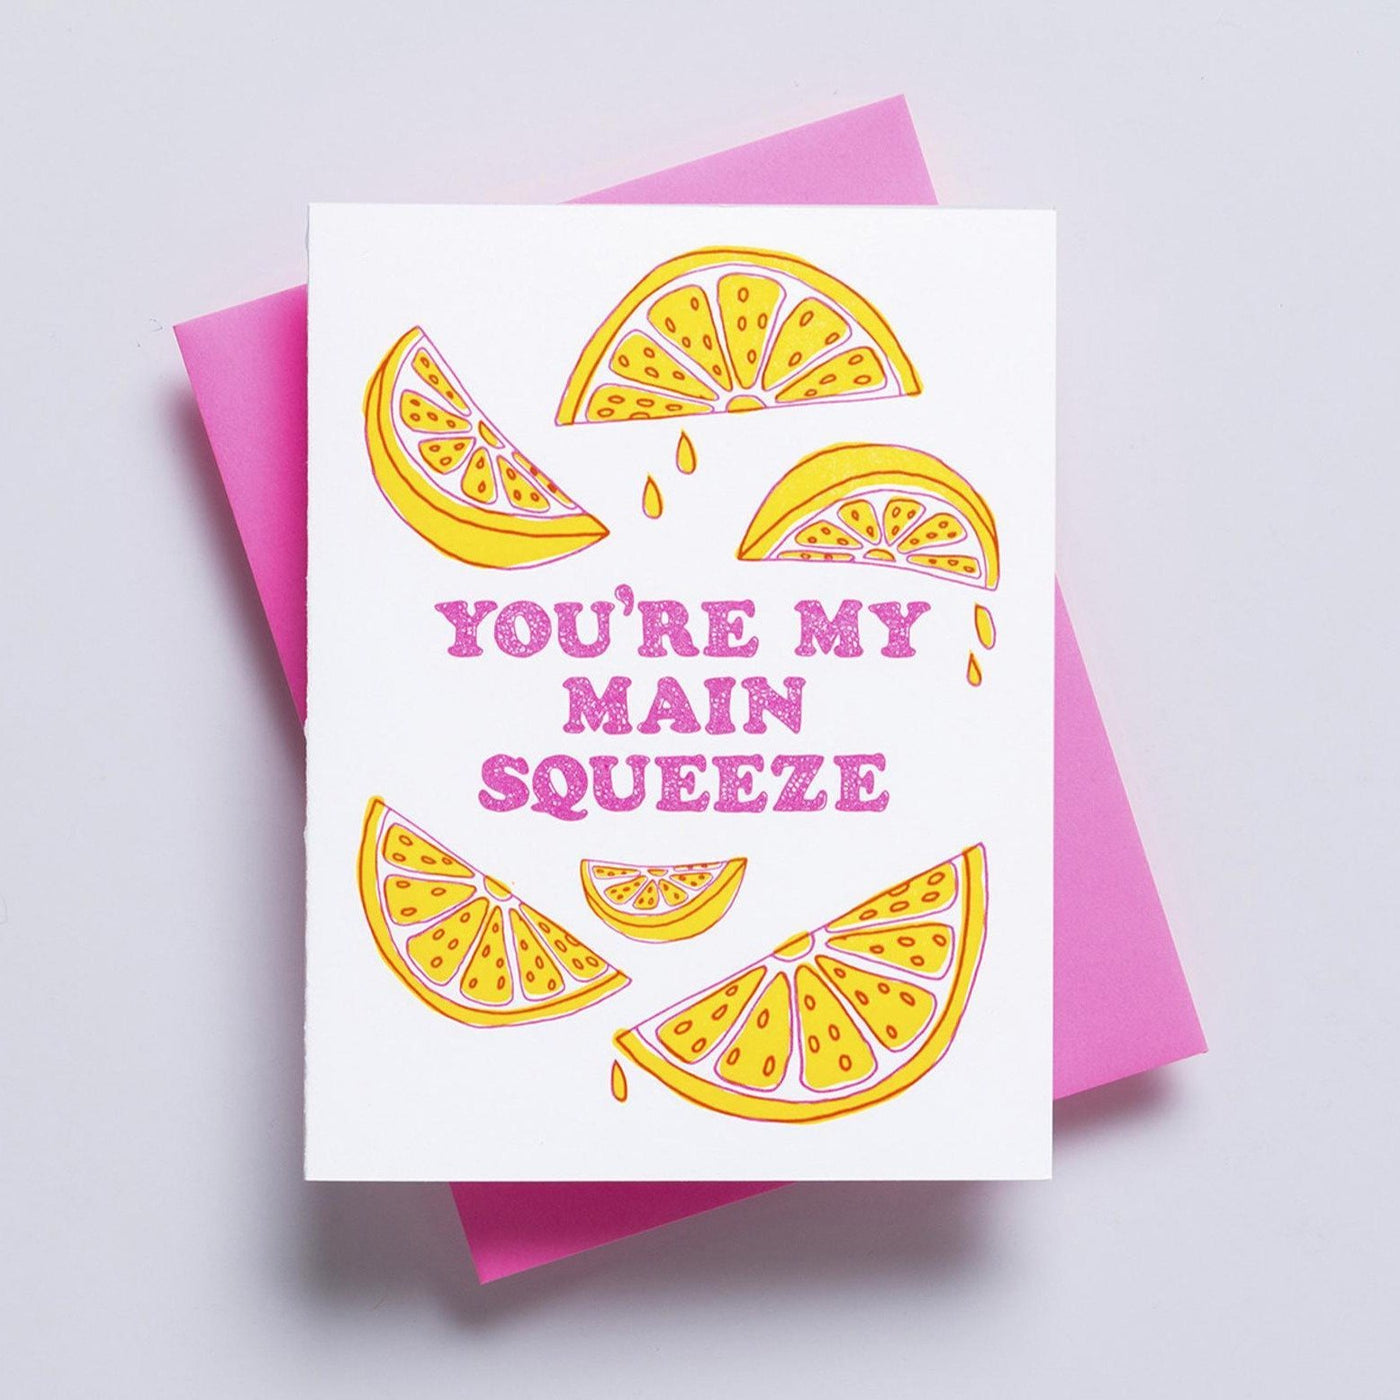 A cute white greeting card with the words 'you're my main squeeze' written in pink and surrounded by dripping lemon slices